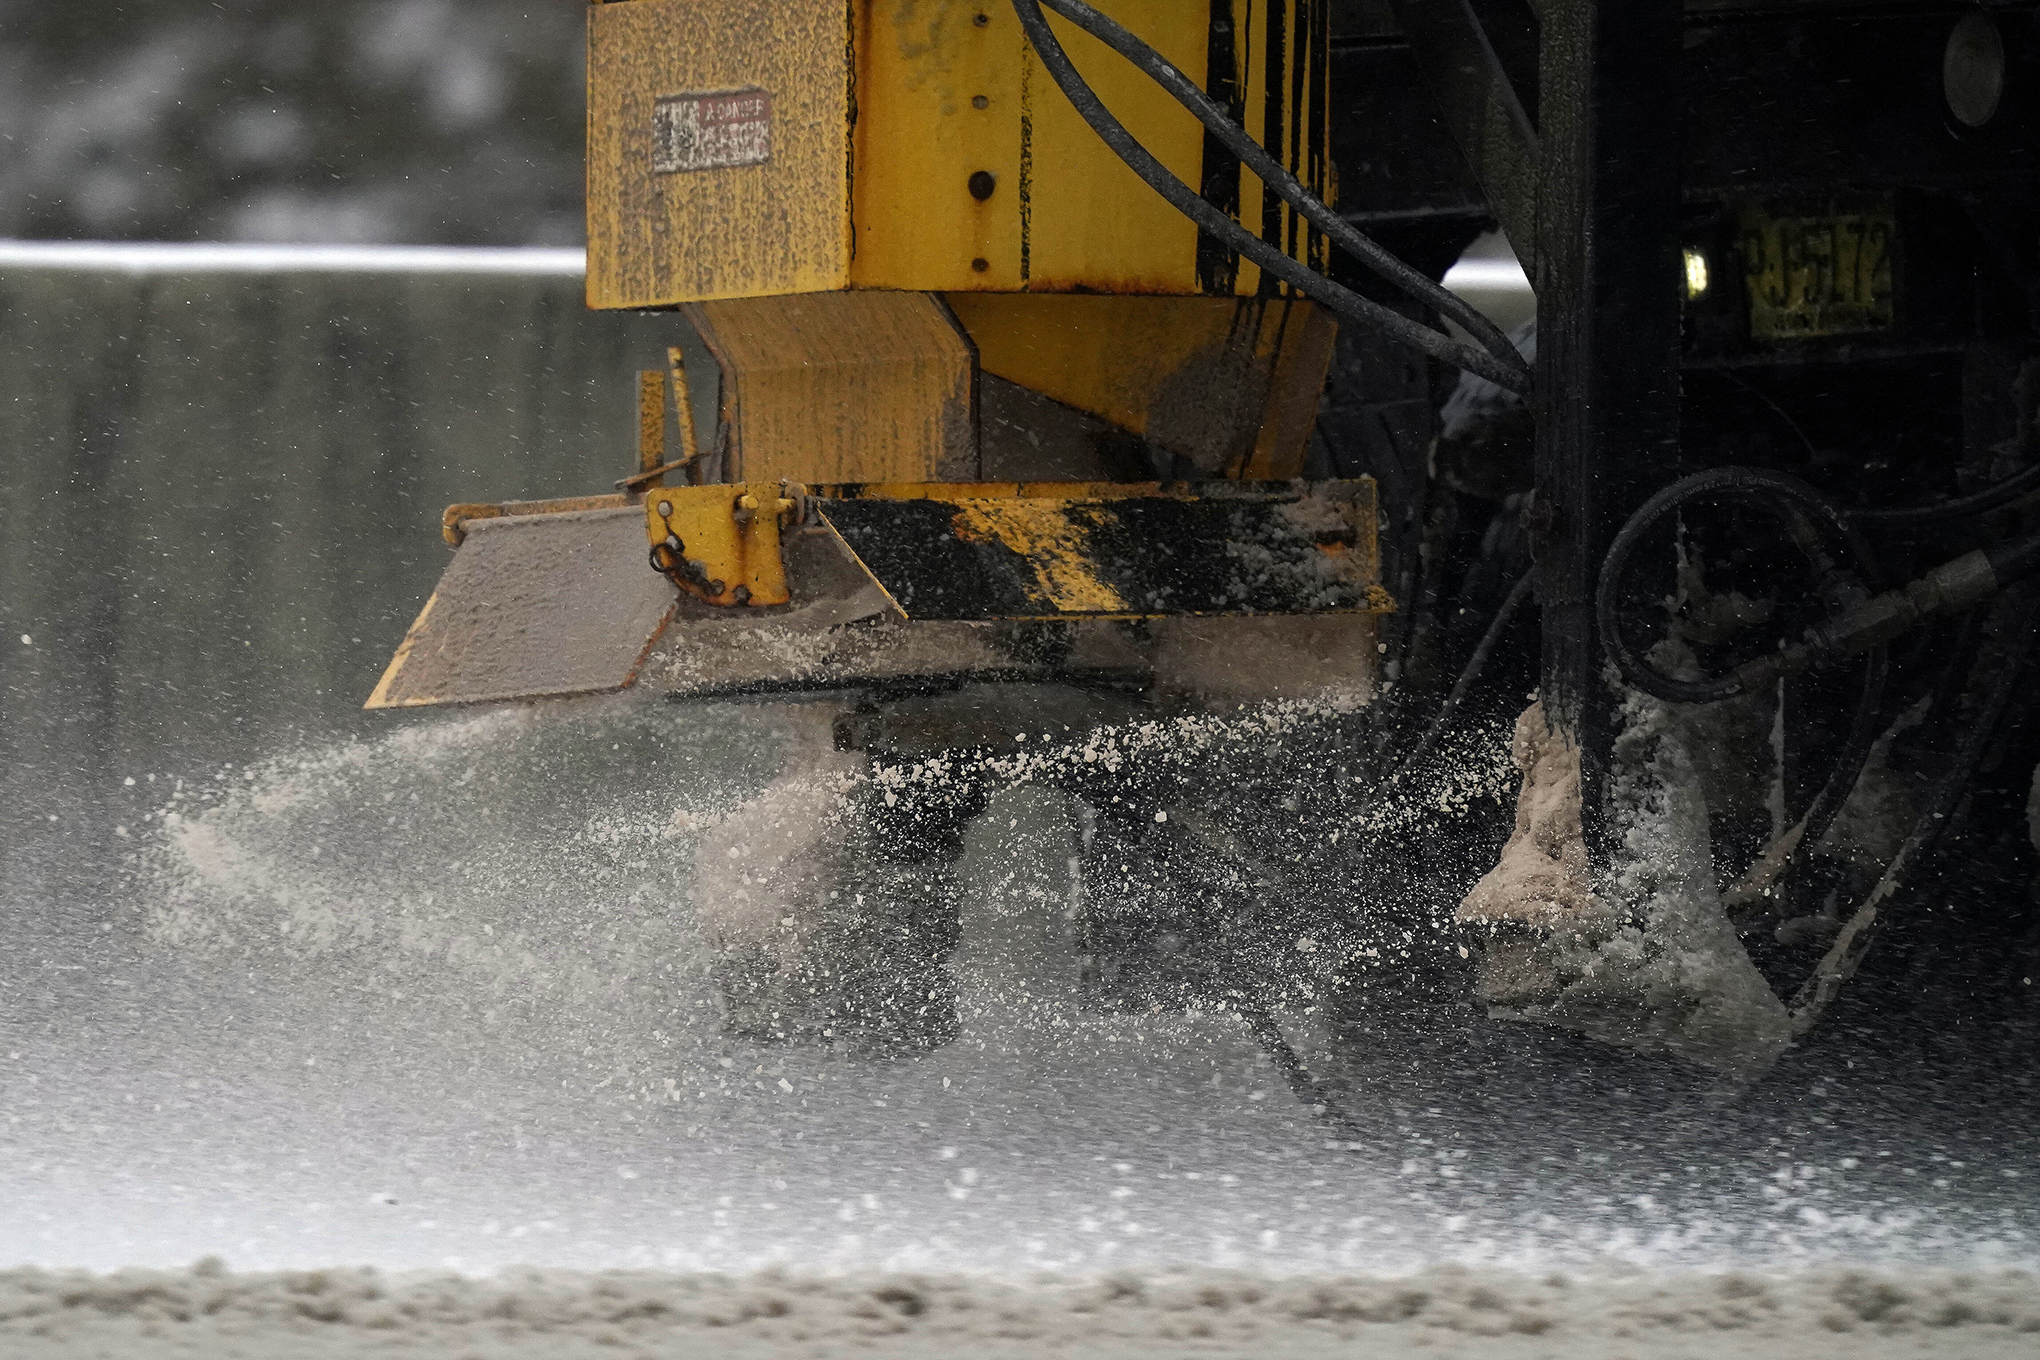 A salt truck spreads brine on the road.